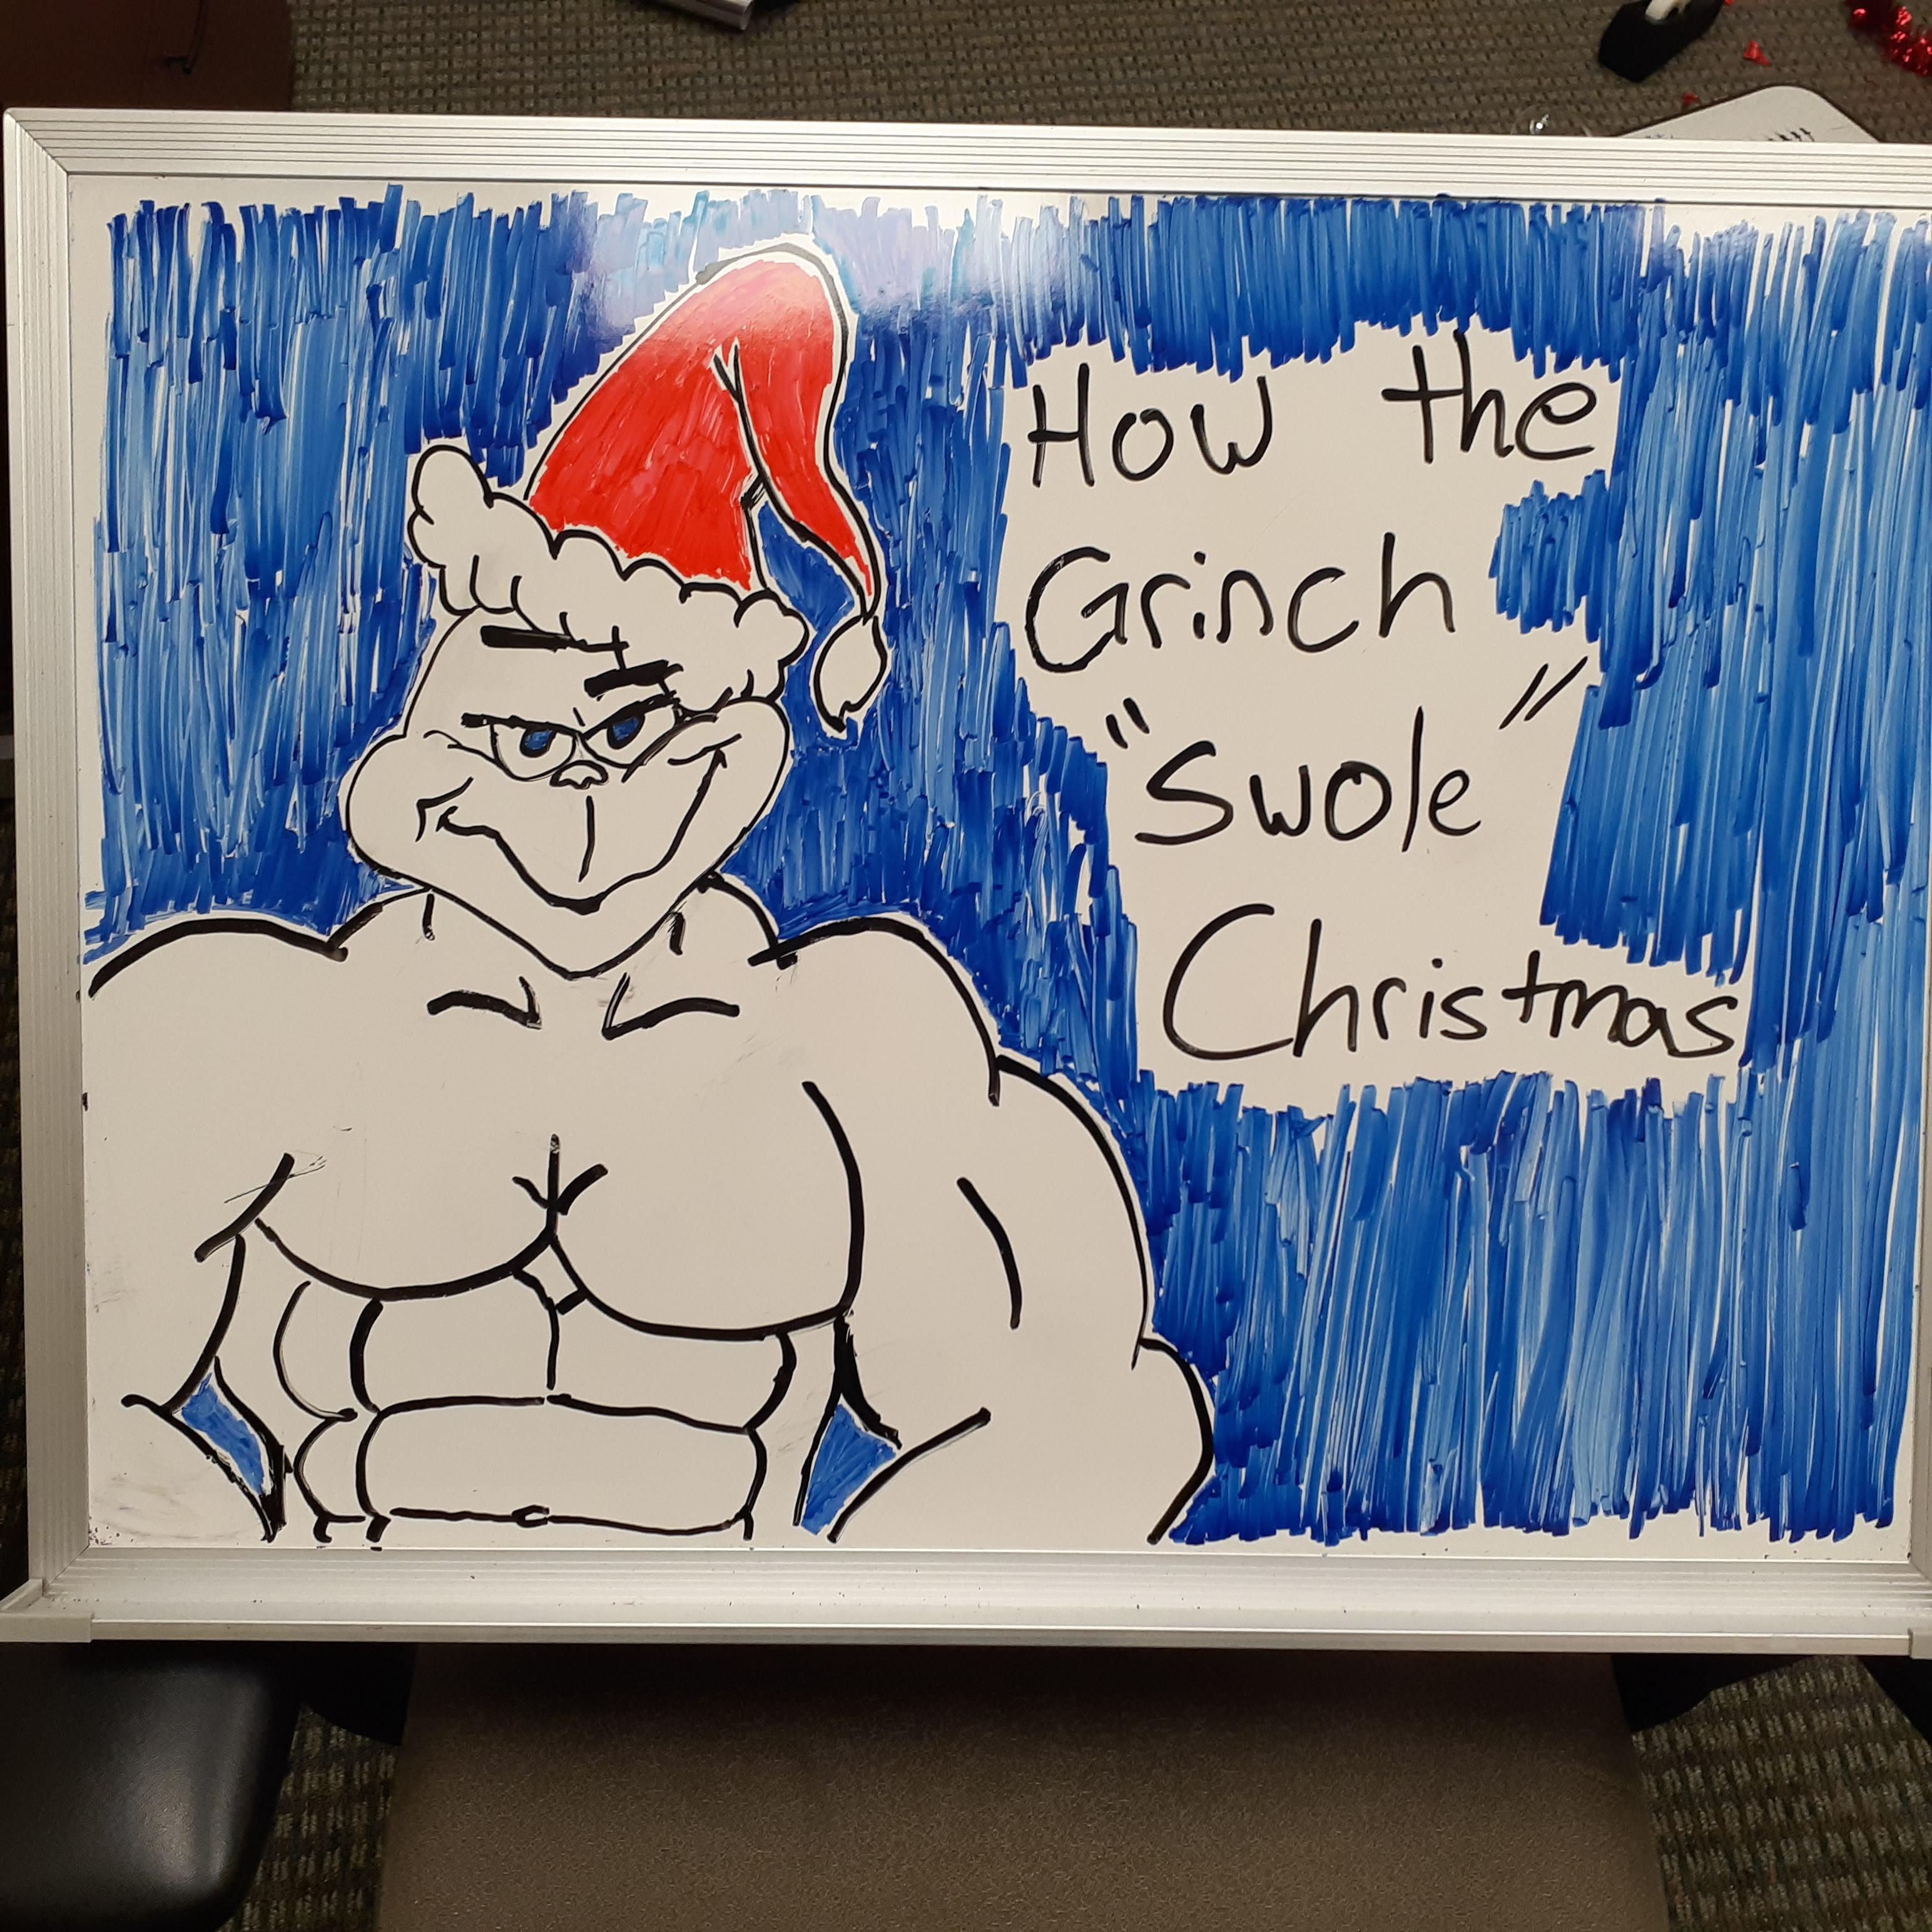 I was asked to draw the Grinch for my office.